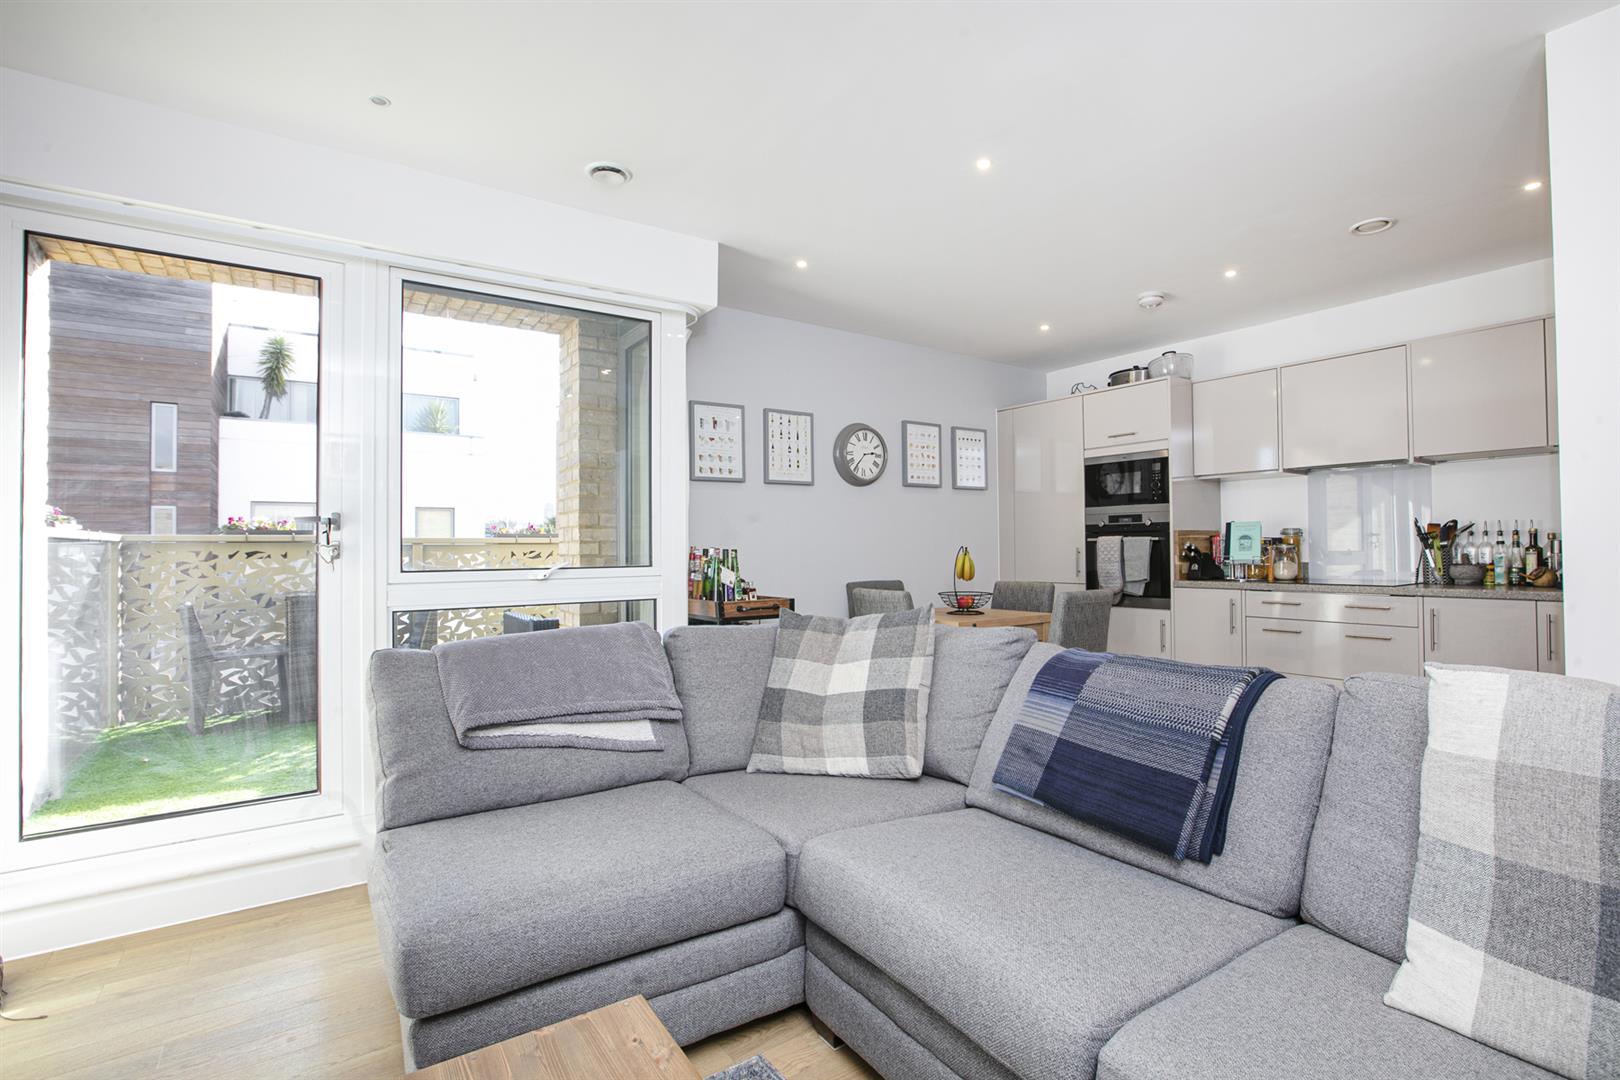 Flat - Purpose Built For Sale in Elmington Road, Camberwell, SE5 904 view4